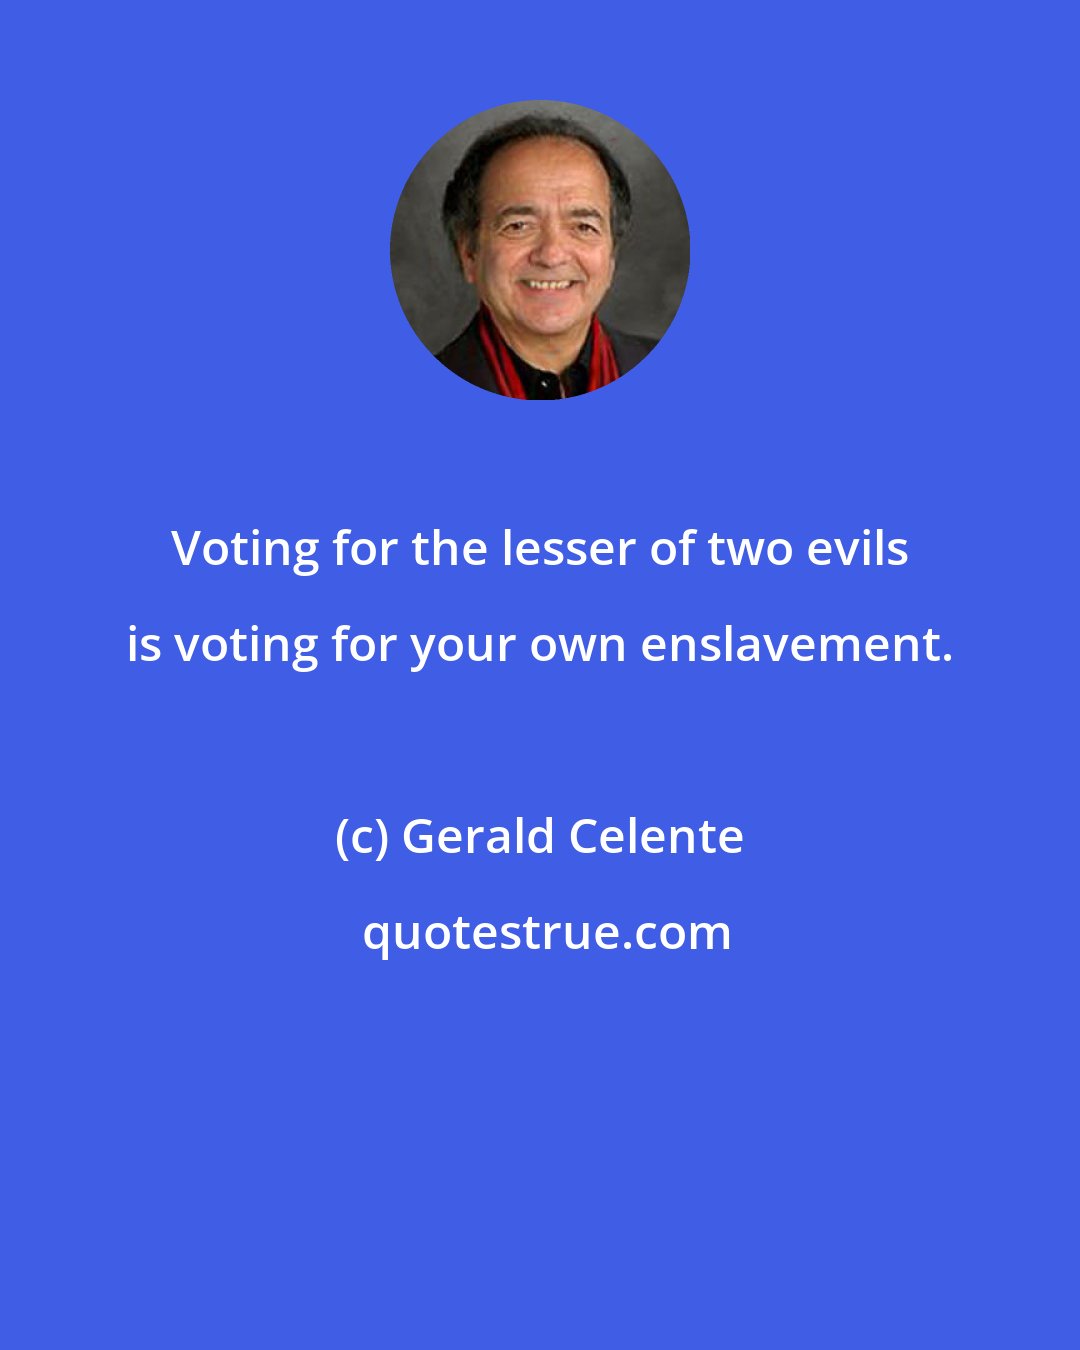 Gerald Celente: Voting for the lesser of two evils is voting for your own enslavement.